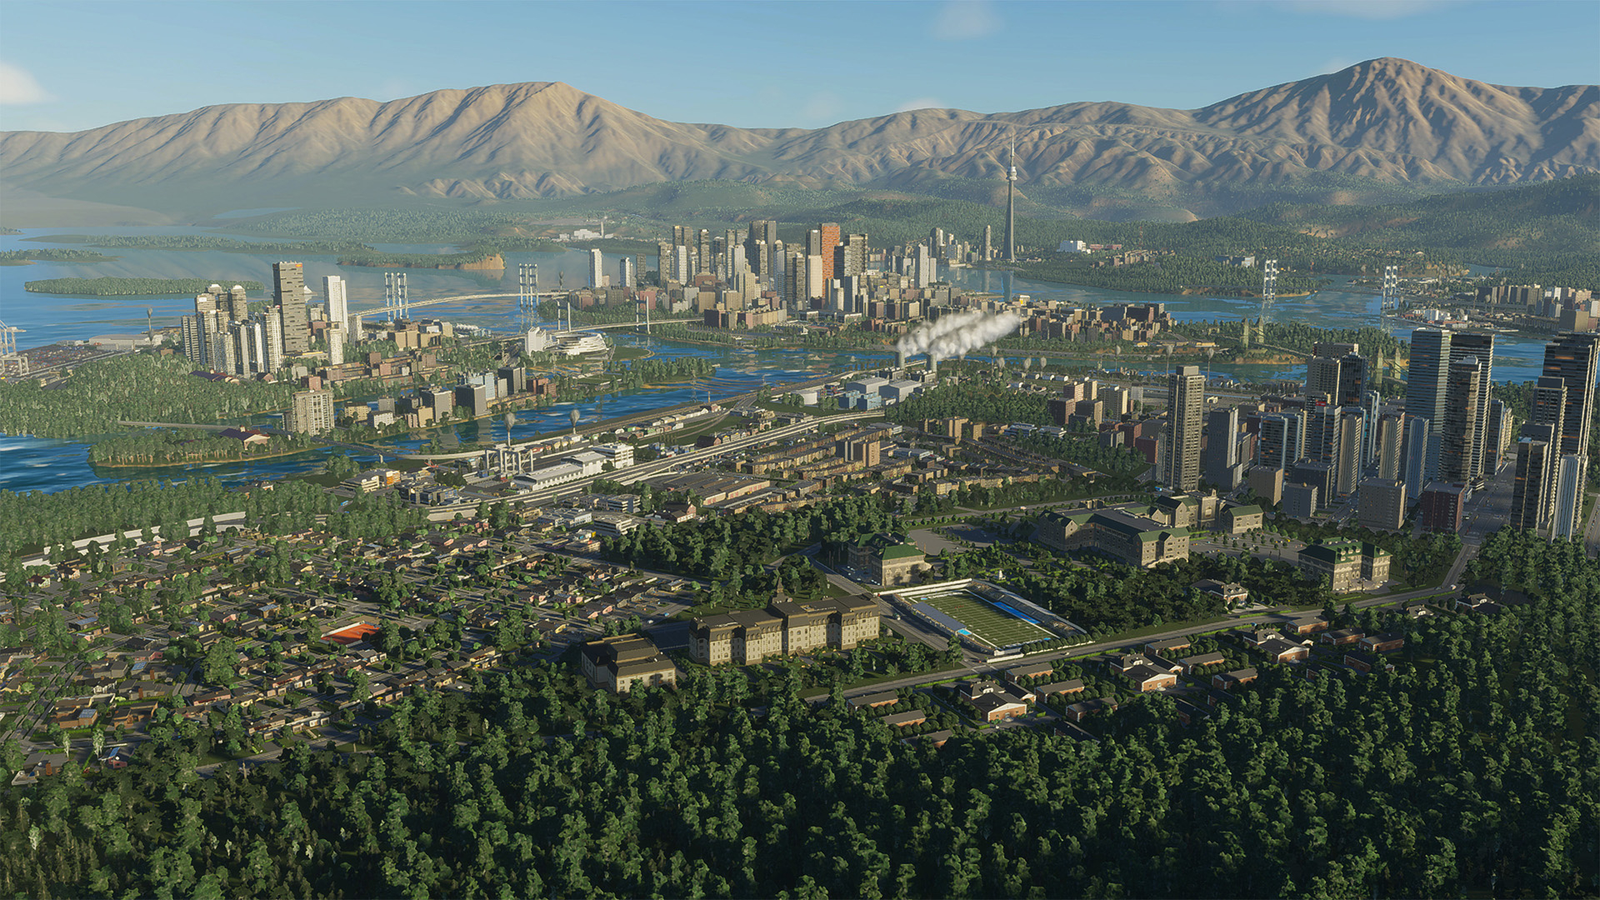 Ahead of Cities: Skylines 2, the devs detail the final DLC for the original  game